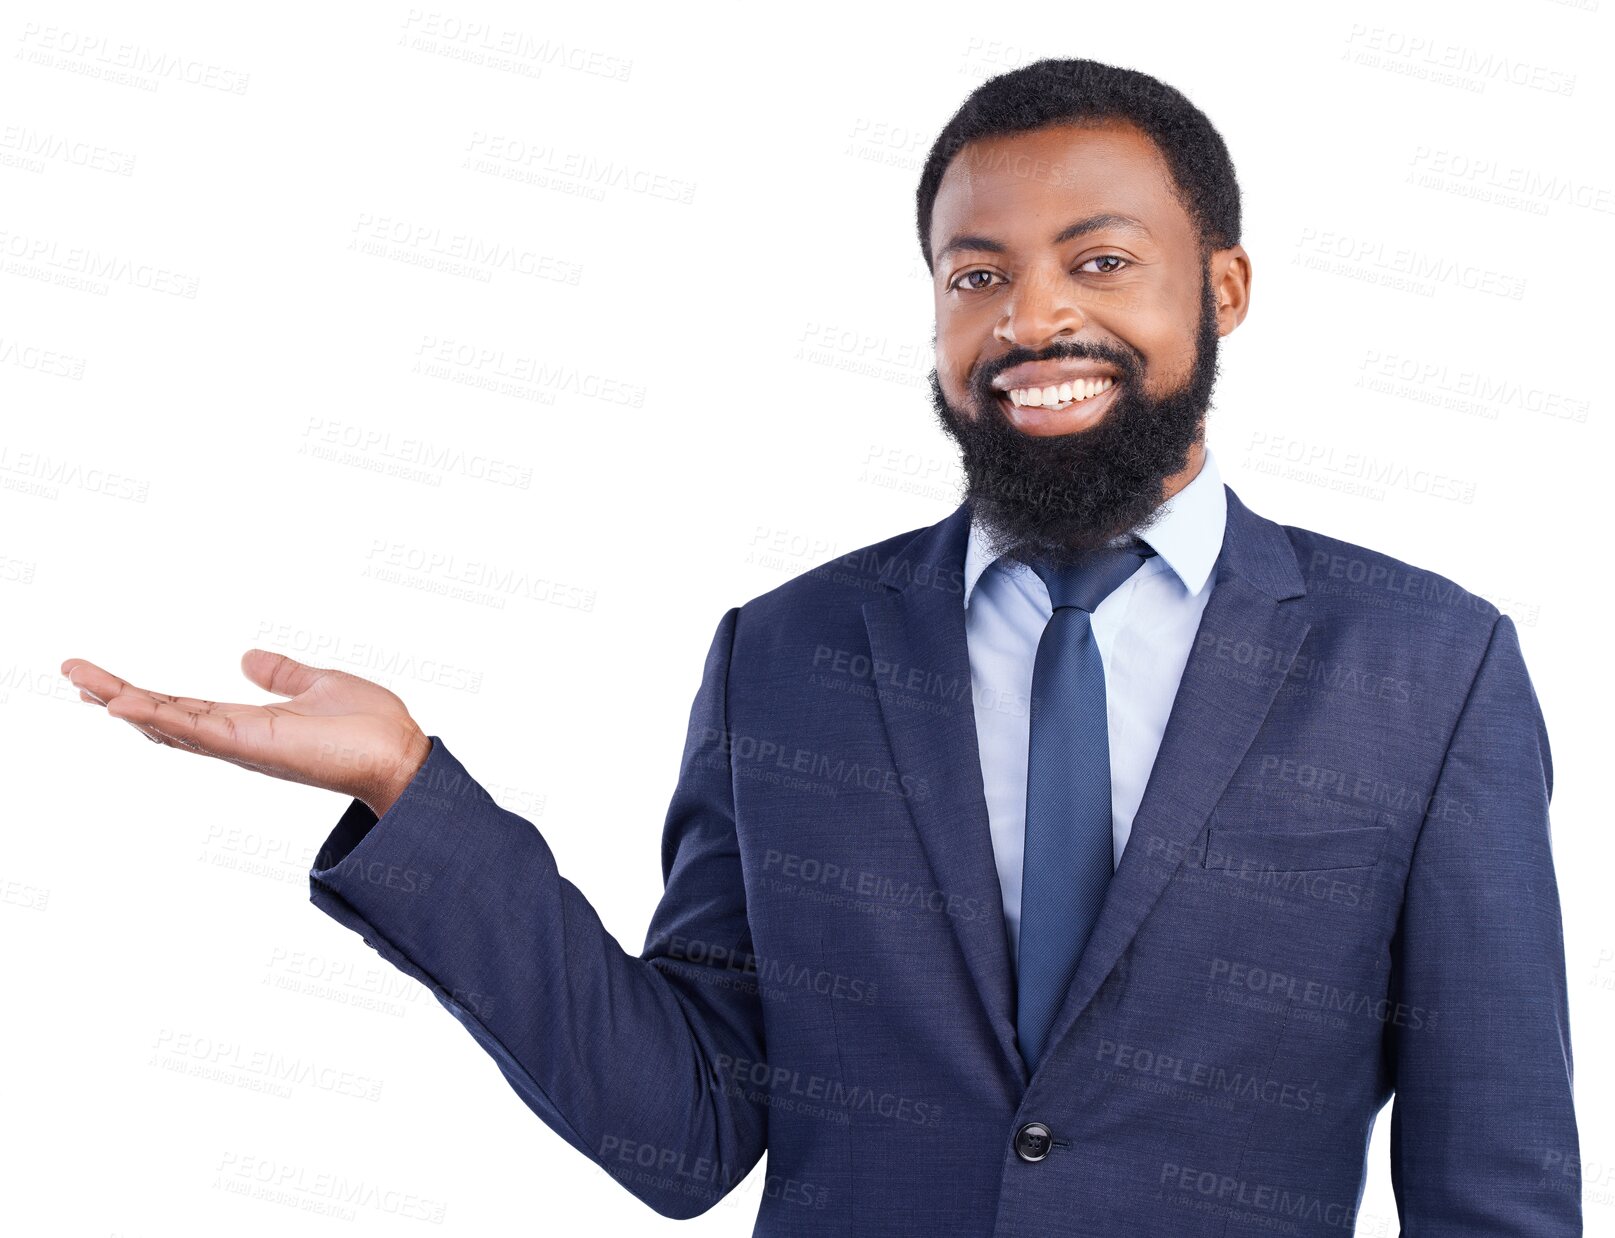 Buy stock photo Portrait, business and black man with a smile, showing and consultant isolated against a transparent background. Face, male person and employee with presentation, professional and career with png